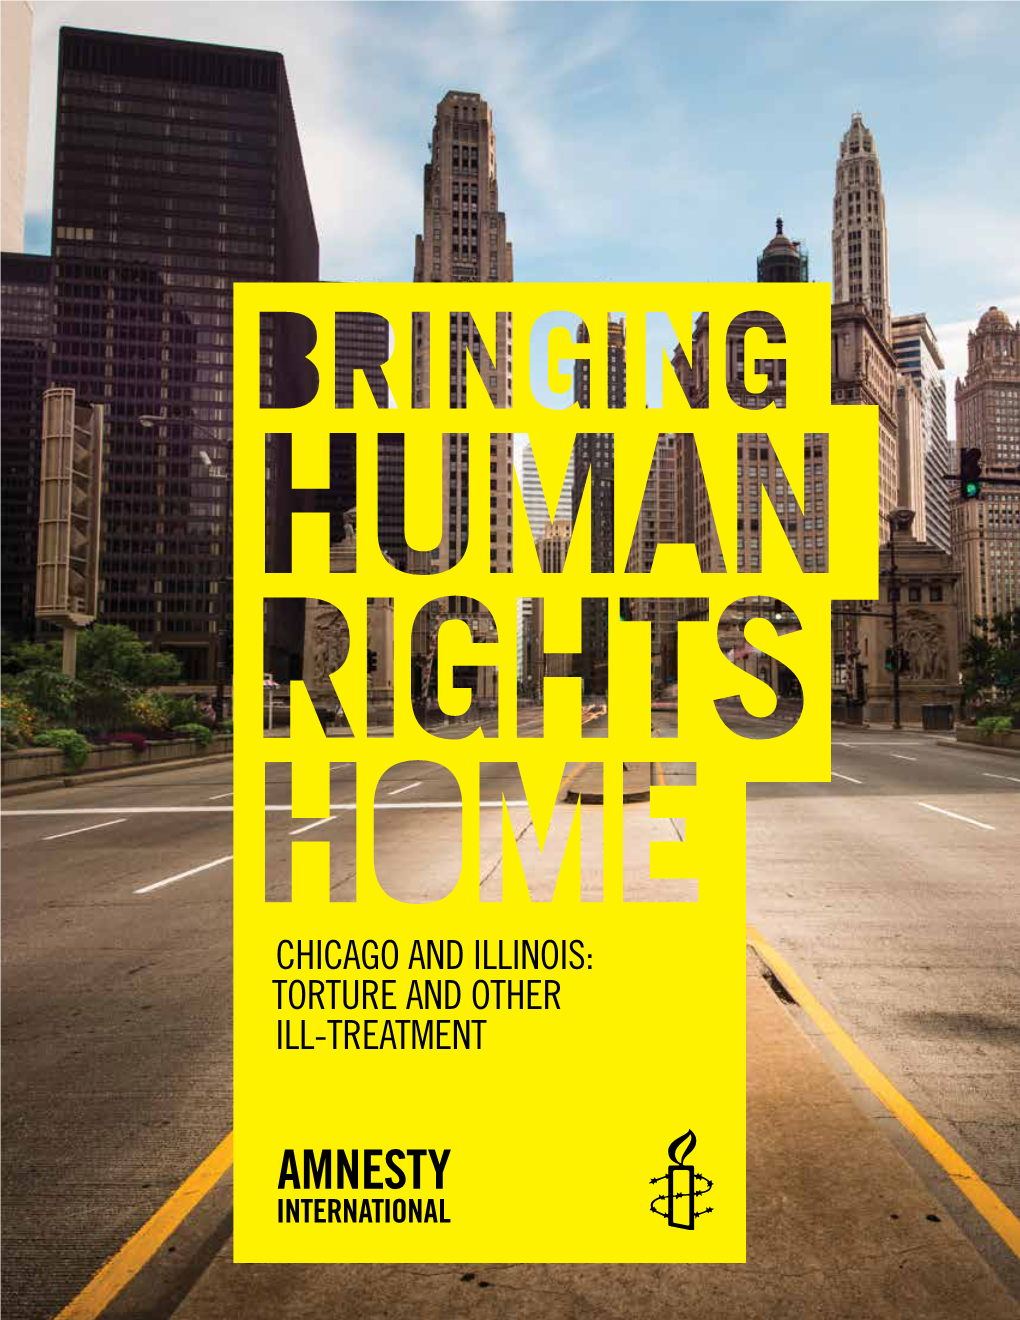 CHICAGO and ILLINOIS: Torture AND